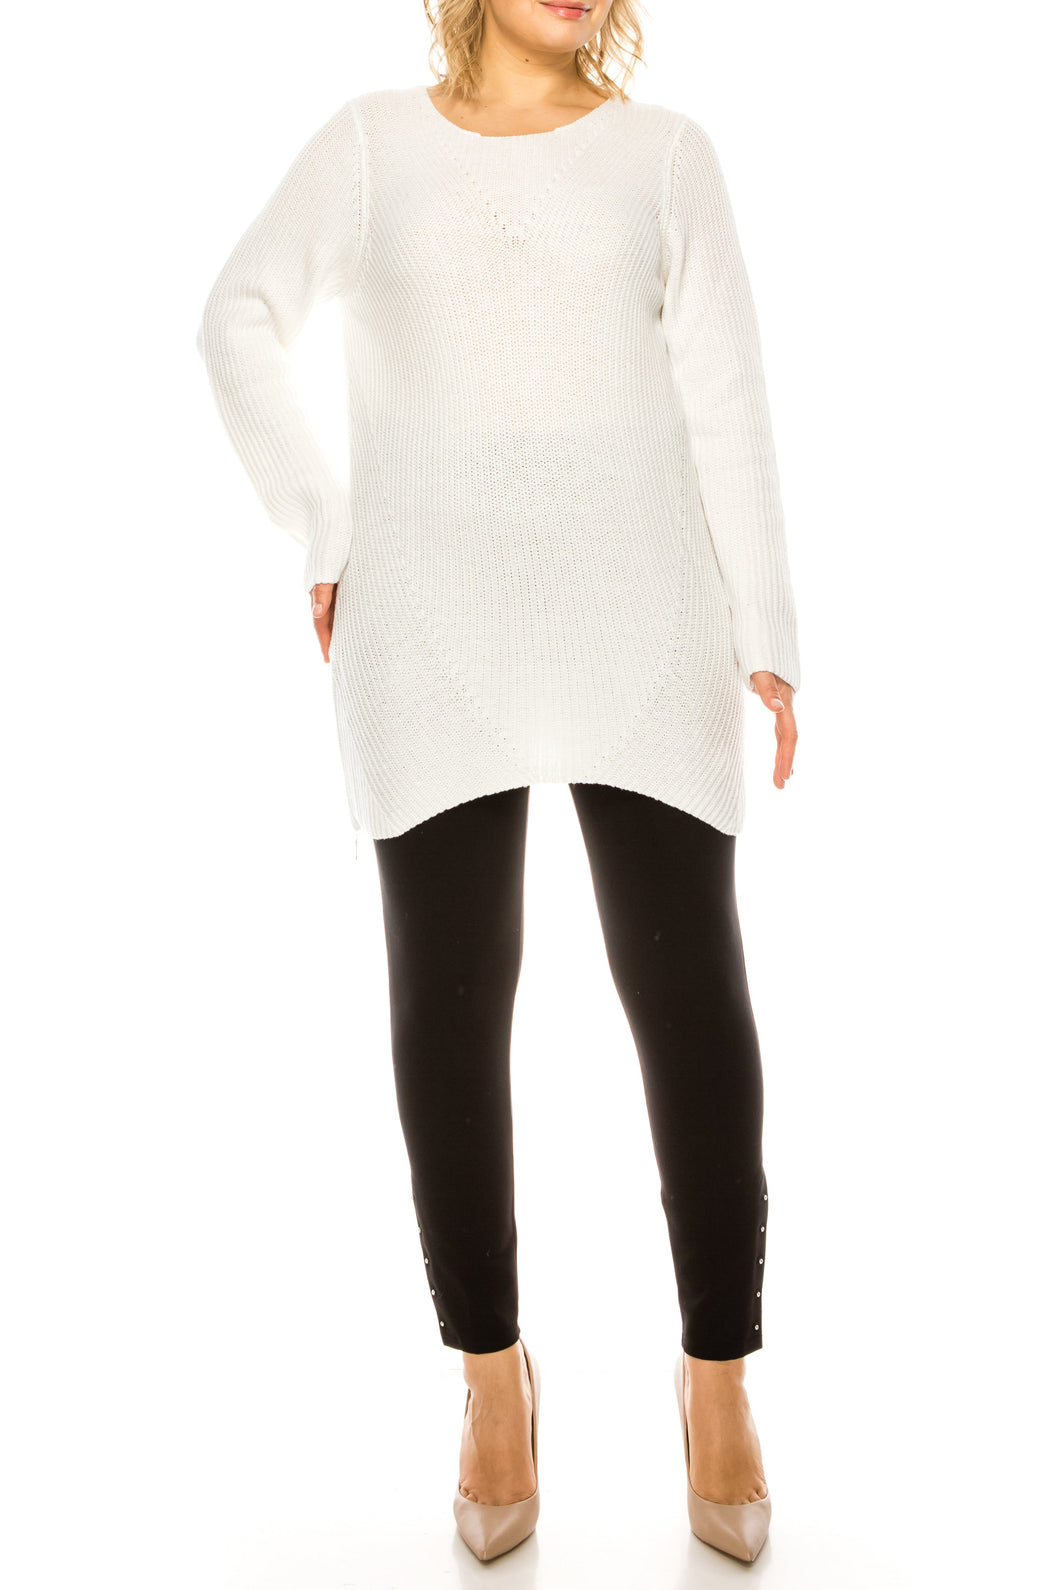 Nygard White Long Sleeve Tunic with Side Zipper Detail